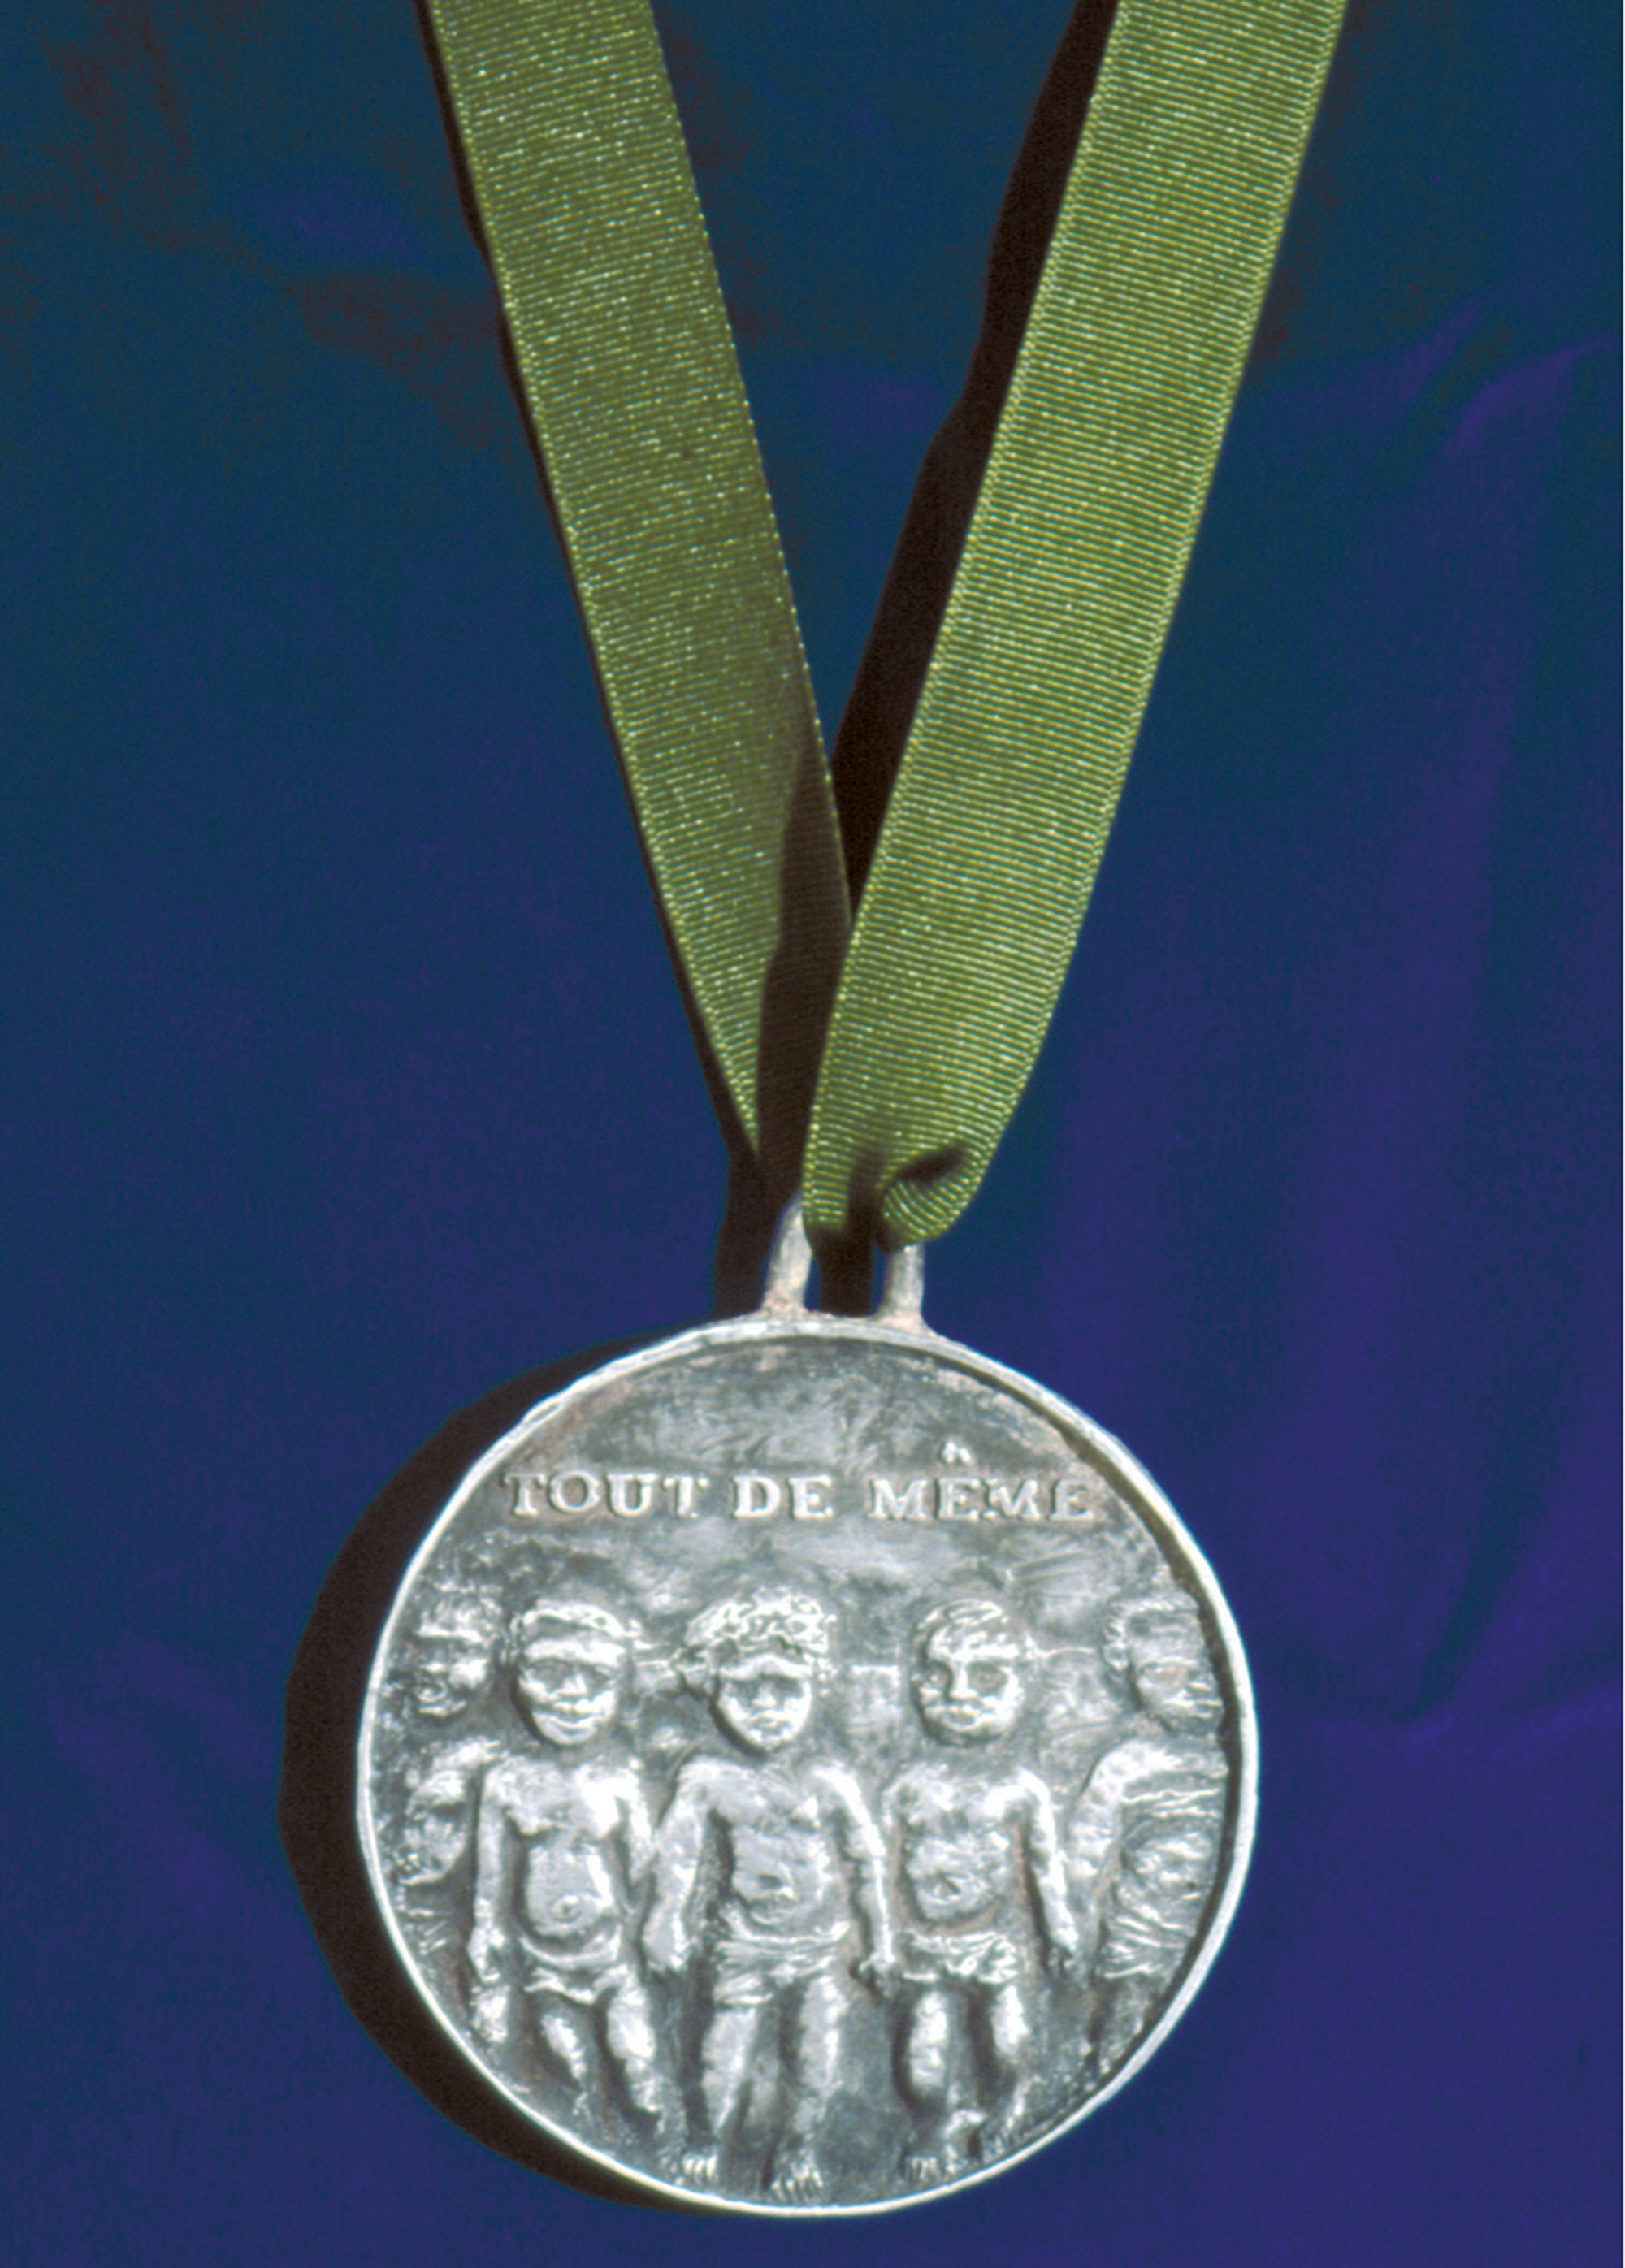 A photograph of the front of Kris Lee's reproduction of the 1976 Montreal Olympic participation medal.